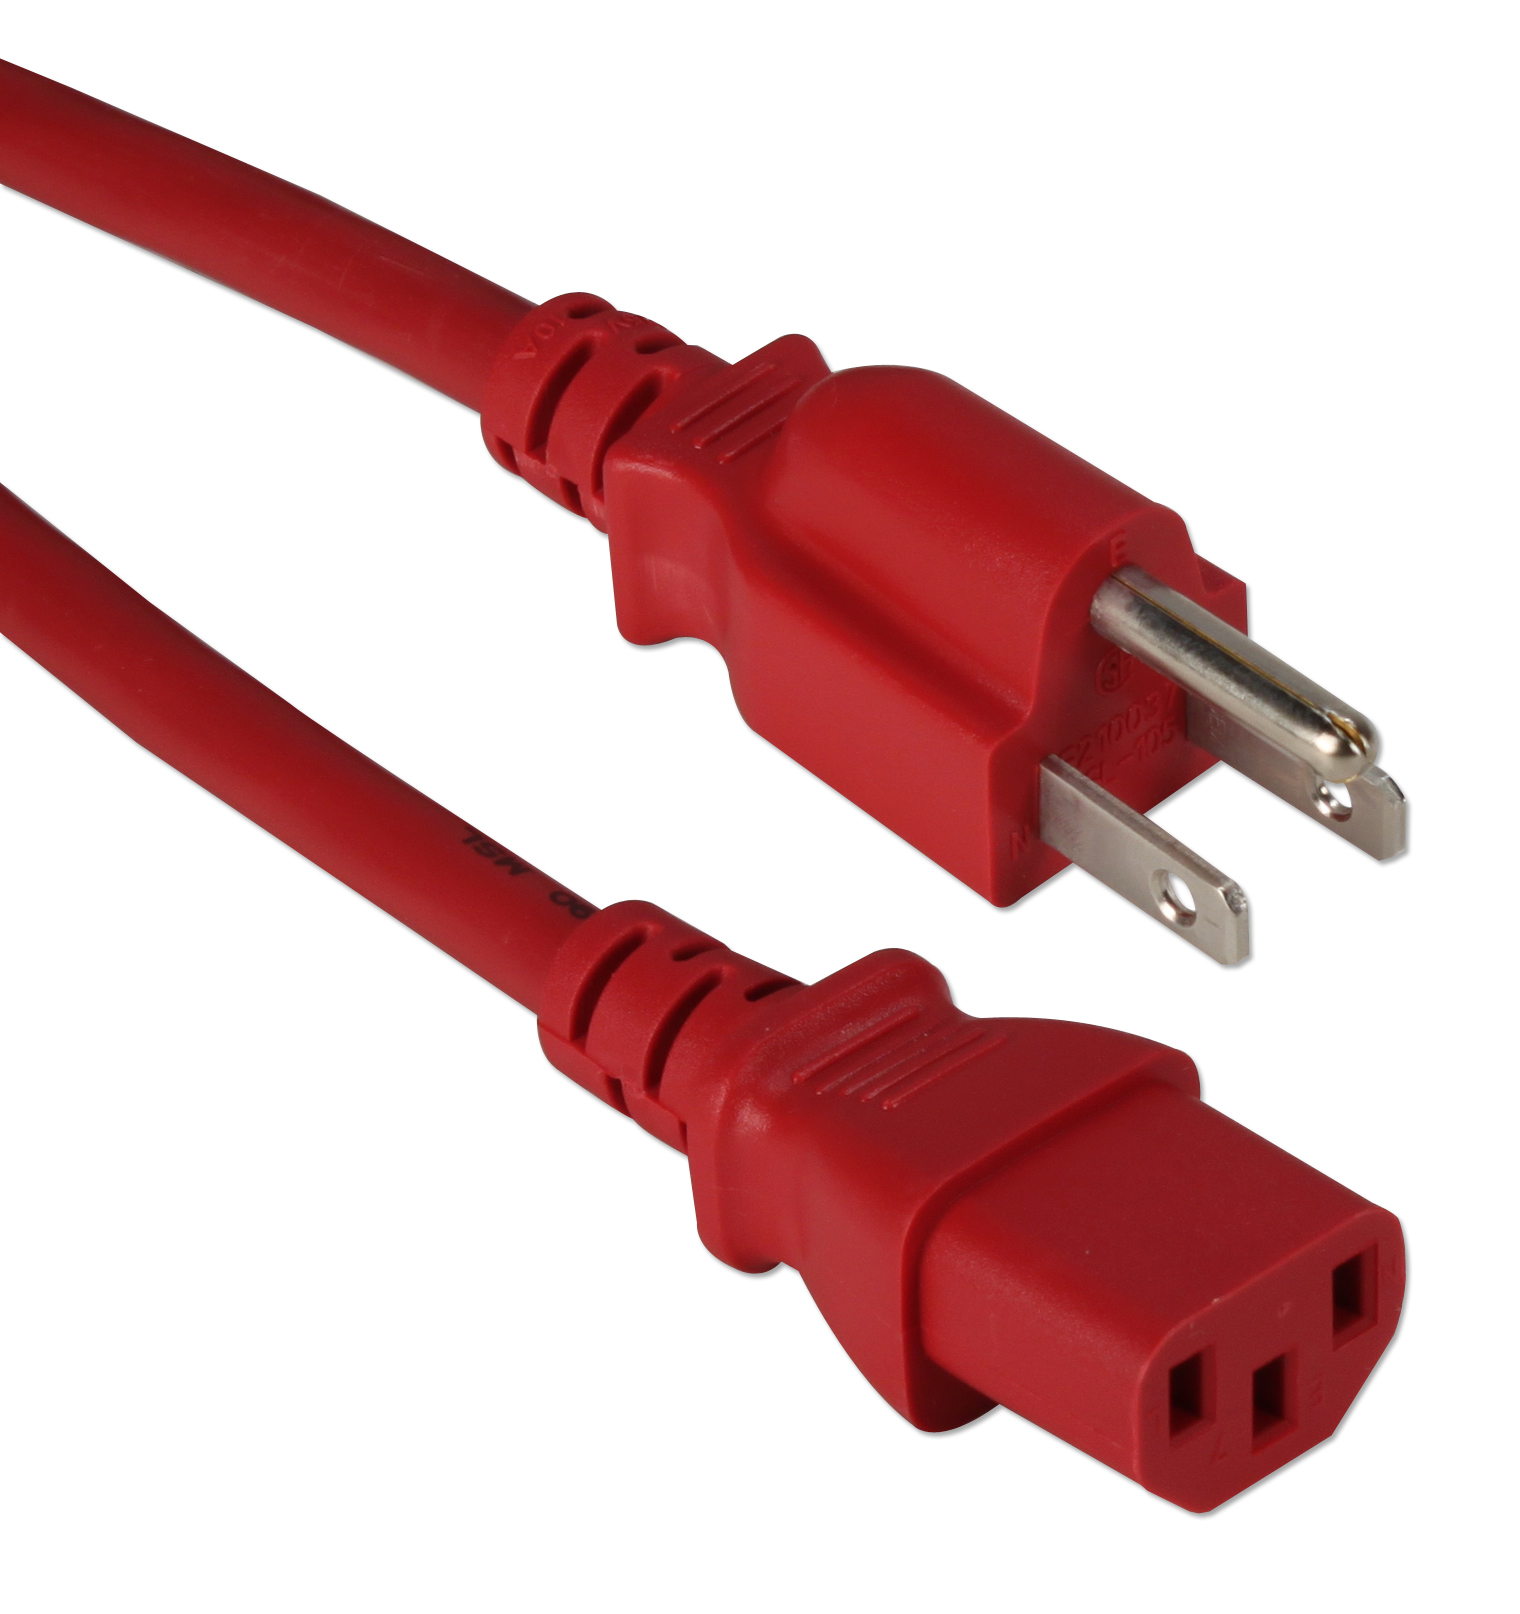 PC-10W1-01204-RD-CMT - 4ft 18AWG Computer Power Cord